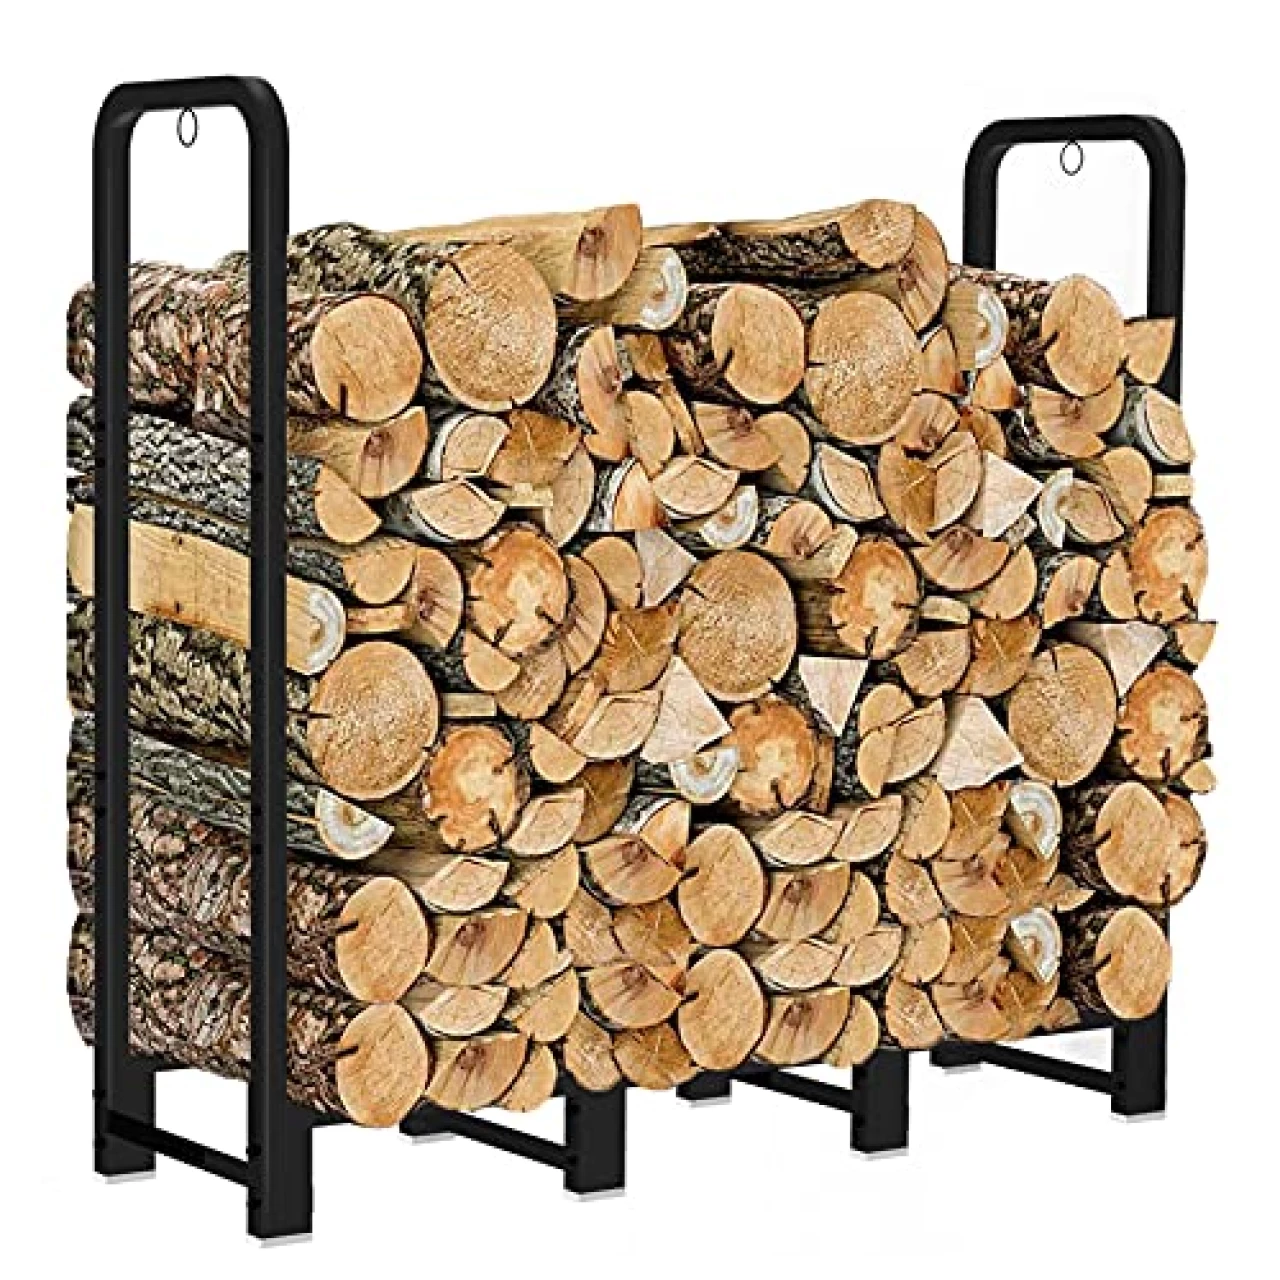 Artibear Firewood Rack Stand 4ft Heavy Duty Logs Holder for Outdoor Indoor Fireplace